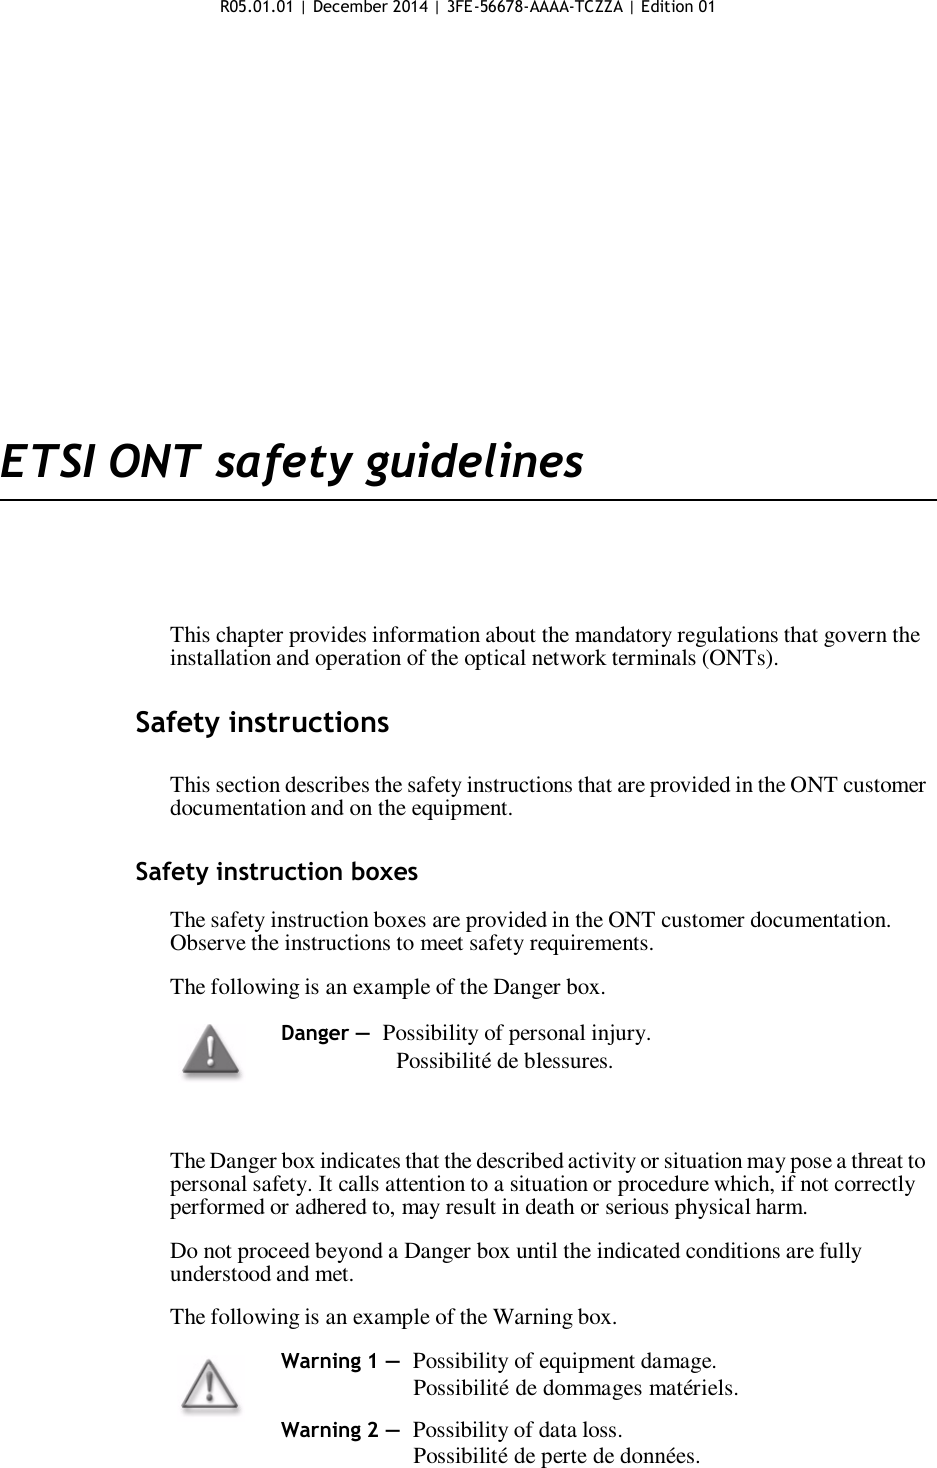 R05.01.01 | December 2014 | 3FE-56678-AAAA-TCZZA | Edition 01                      ETSI ONT safety guidelines       This chapter provides information about the mandatory regulations that govern the installation and operation of the optical network terminals (ONTs).   Safety instructions   This section describes the safety instructions that are provided in the ONT customer documentation and on the equipment.   Safety instruction boxes  The safety instruction boxes are provided in the ONT customer documentation. Observe the instructions to meet safety requirements.  The following is an example of the Danger box.  Danger — Possibility of personal injury. Possibilité de blessures.    The Danger box indicates that the described activity or situation may pose a threat to personal safety. It calls attention to a situation or procedure which, if not correctly performed or adhered to, may result in death or serious physical harm.  Do not proceed beyond a Danger box until the indicated conditions are fully understood and met.  The following is an example of the Warning box.  Warning 1 — Possibility of equipment damage.                      Possibilité de dommages matériels.  Warning 2 — Possibility of data loss.                      Possibilité de perte de données.    